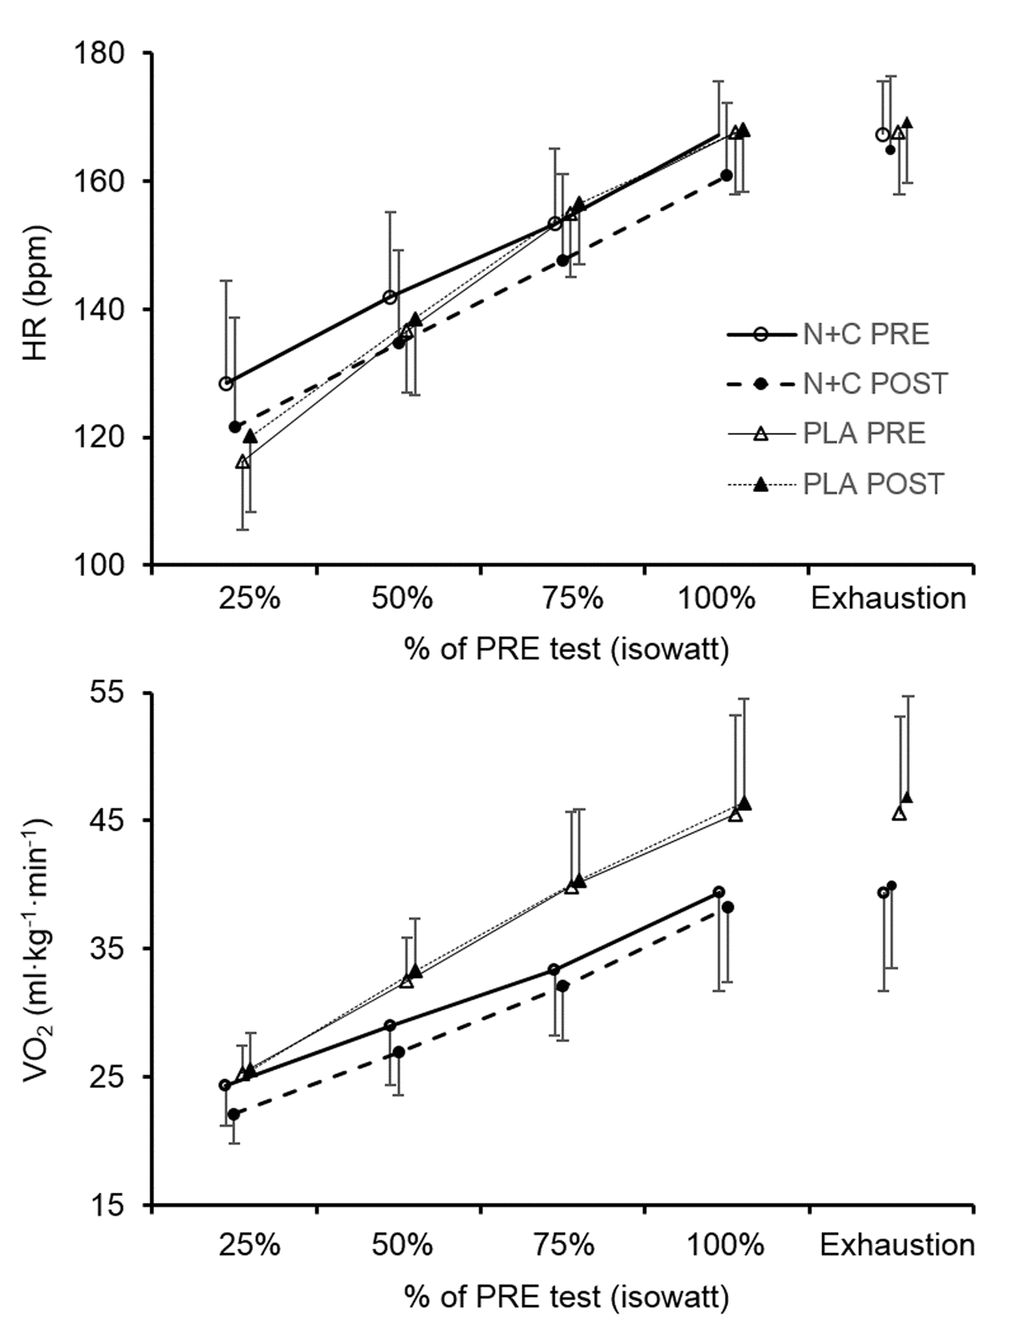 Heart rate and oxygen consumption during the cycling incremental test before and after one month of placebo or nitrate and citrulline intake in older adults. HR, heart rate; VO2, oxygen consumption; N+C, nitrate + citrulline; PLA, placebo; PRE, measure before the supplementation period; POST, measure after the supplementation period; 25%; 50%; 75%; 100%, 25%, 50%, 75% and 100%, of the duration of the PRE test (i.e. isowatt).